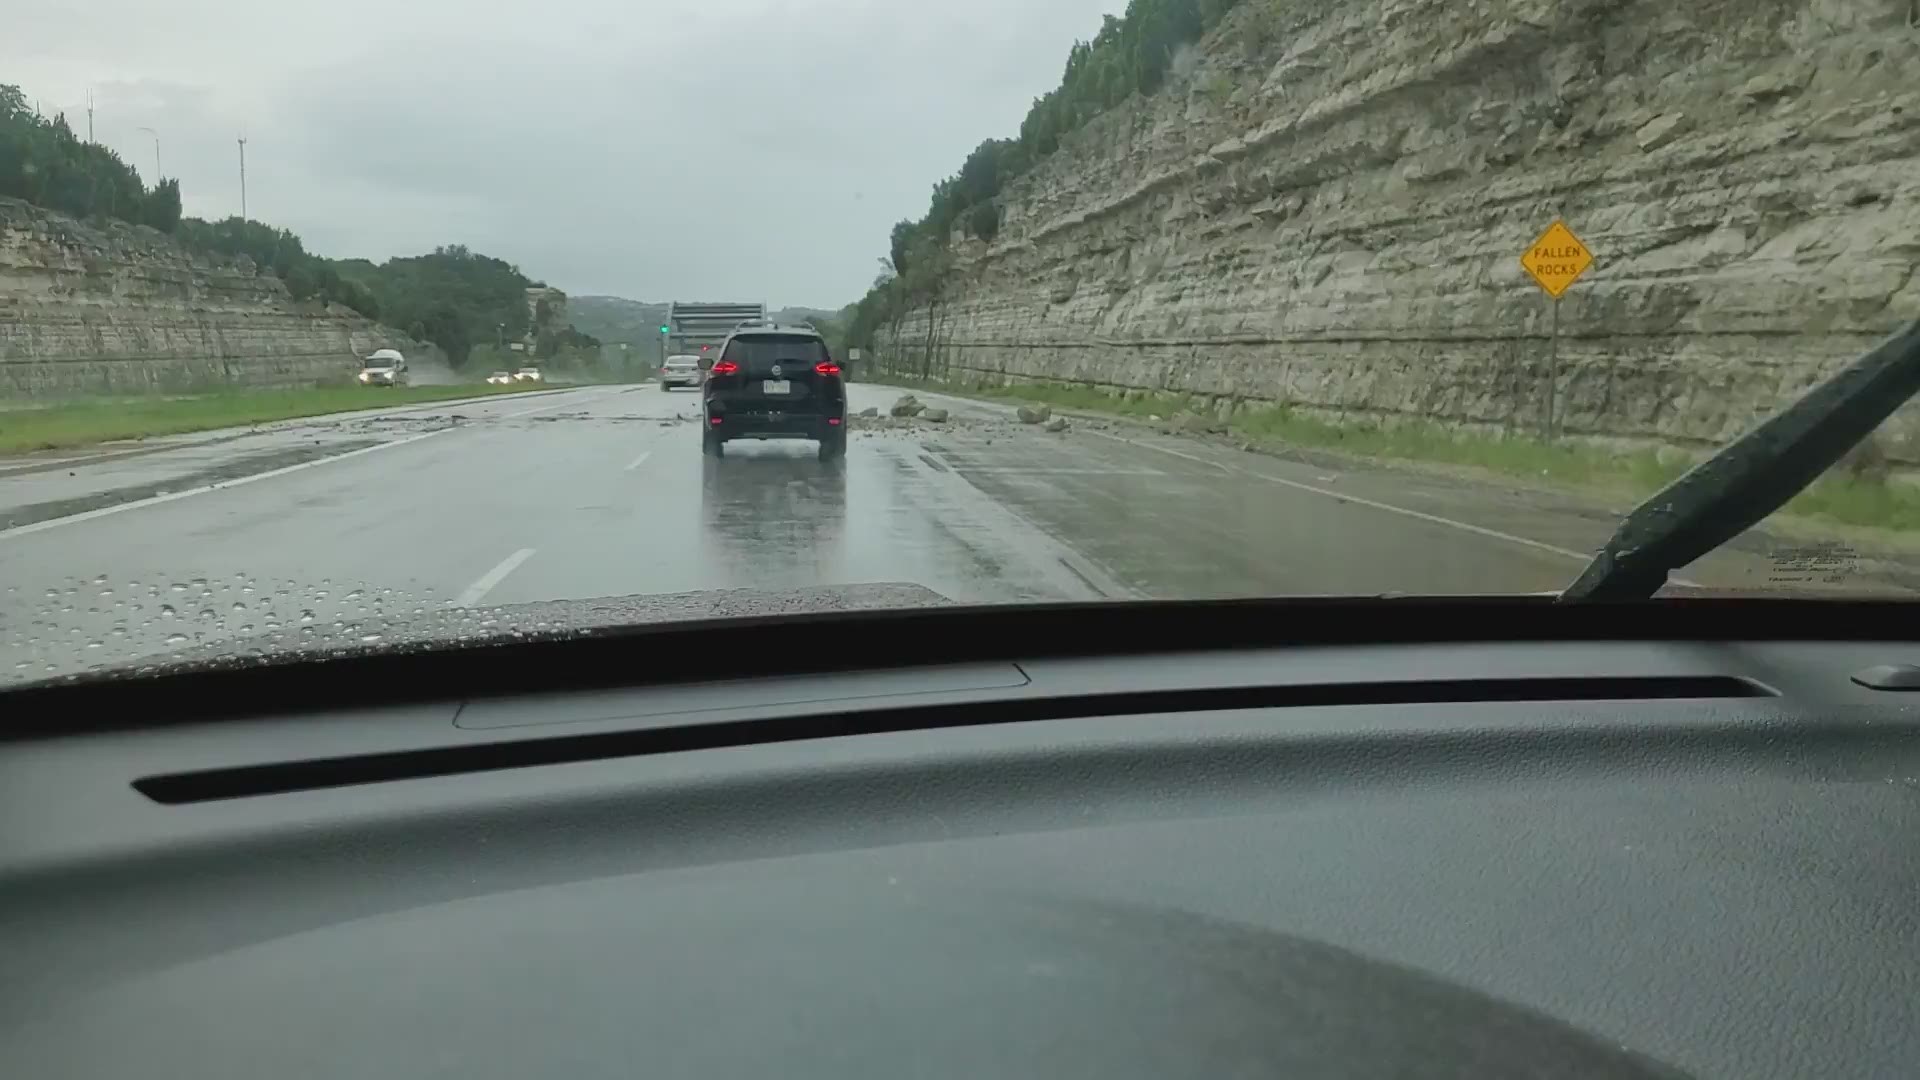 Rocks fell onto the lanes of 360 Capital of Texas Highway at Courtyard Drive southbound on Wednesday after heavy rains. Video courtesy of KVUE viewer Faith Ward.